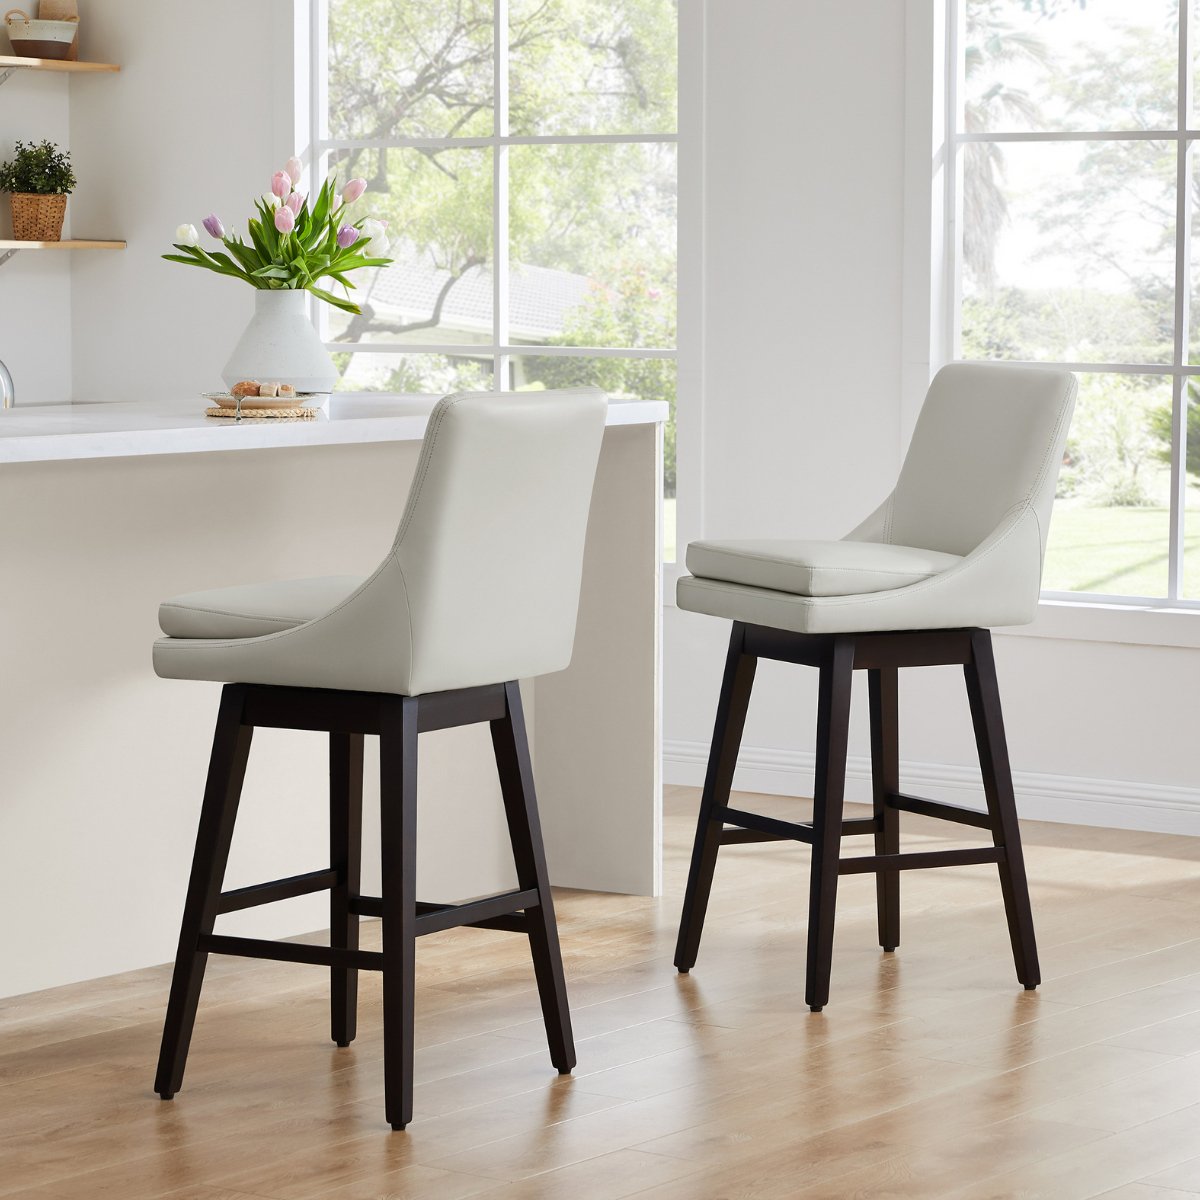 CHITA LIVING-Lissa Swivel Counter Stool 26.8'' ( Set of 2)-Counter Stools-Faux Leather-Light Gray-